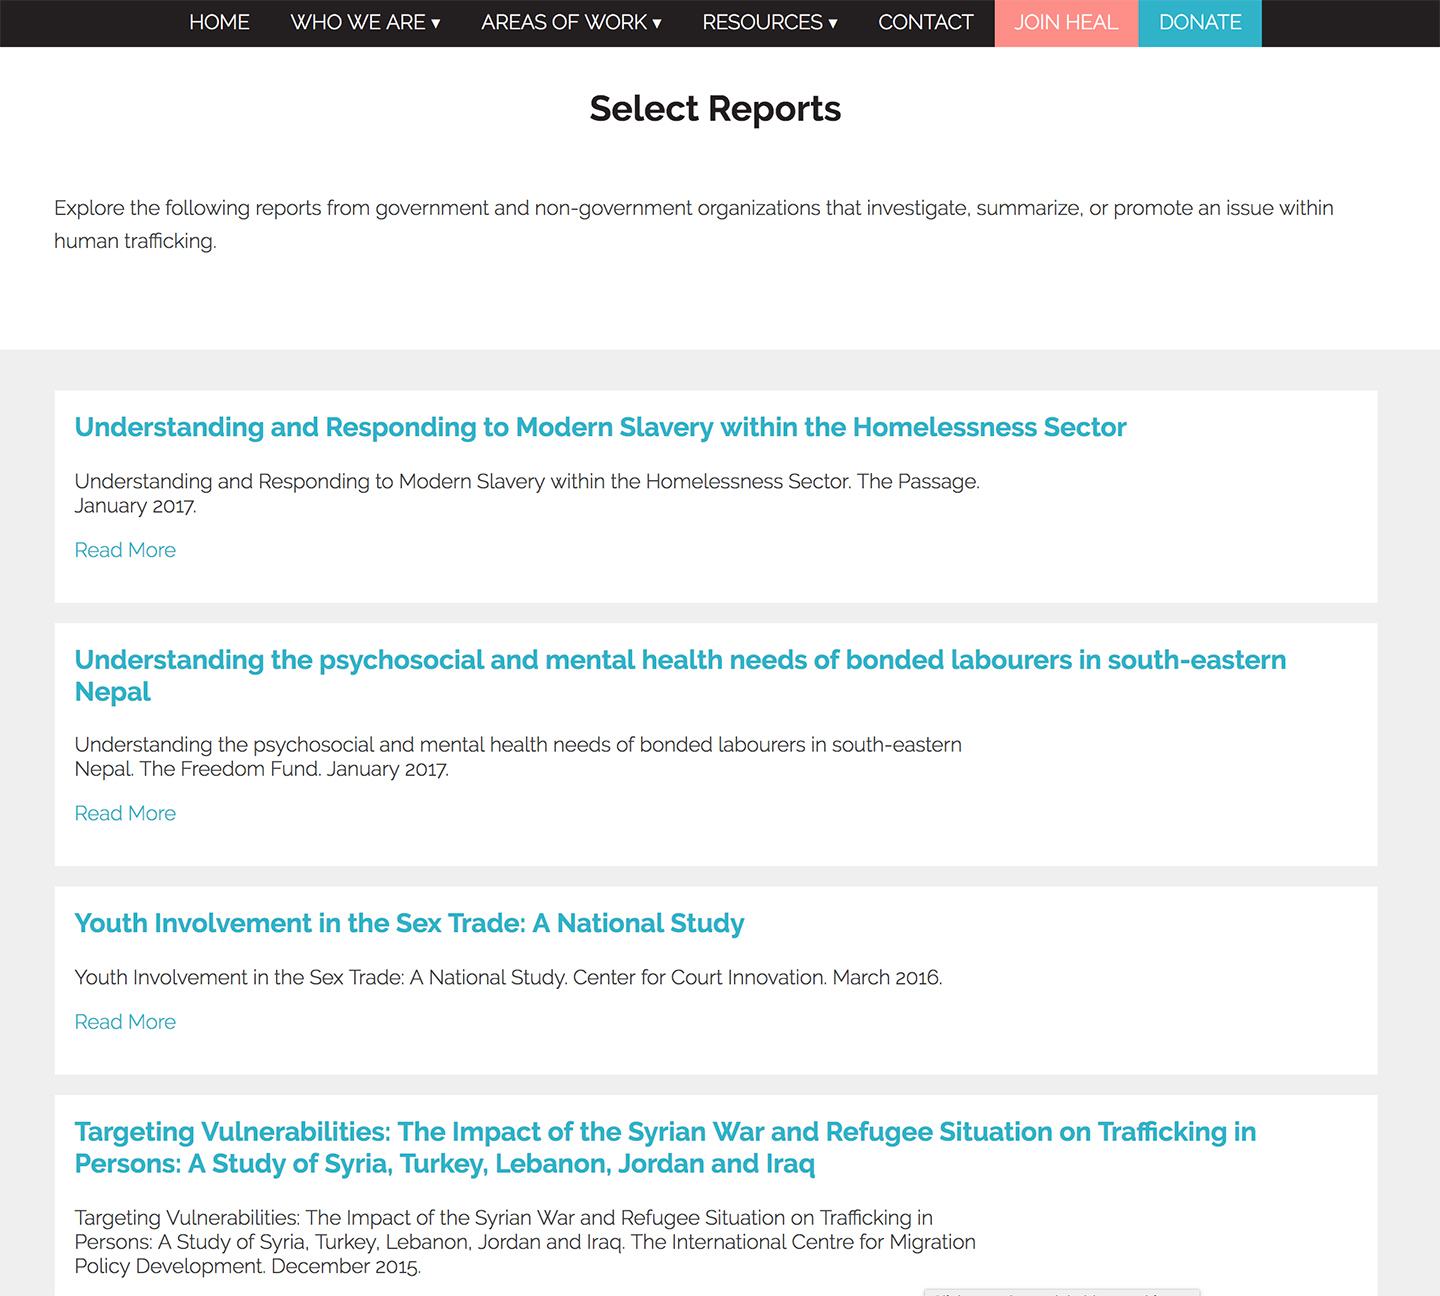 HEAL Trafficking: Searchable reports and resources